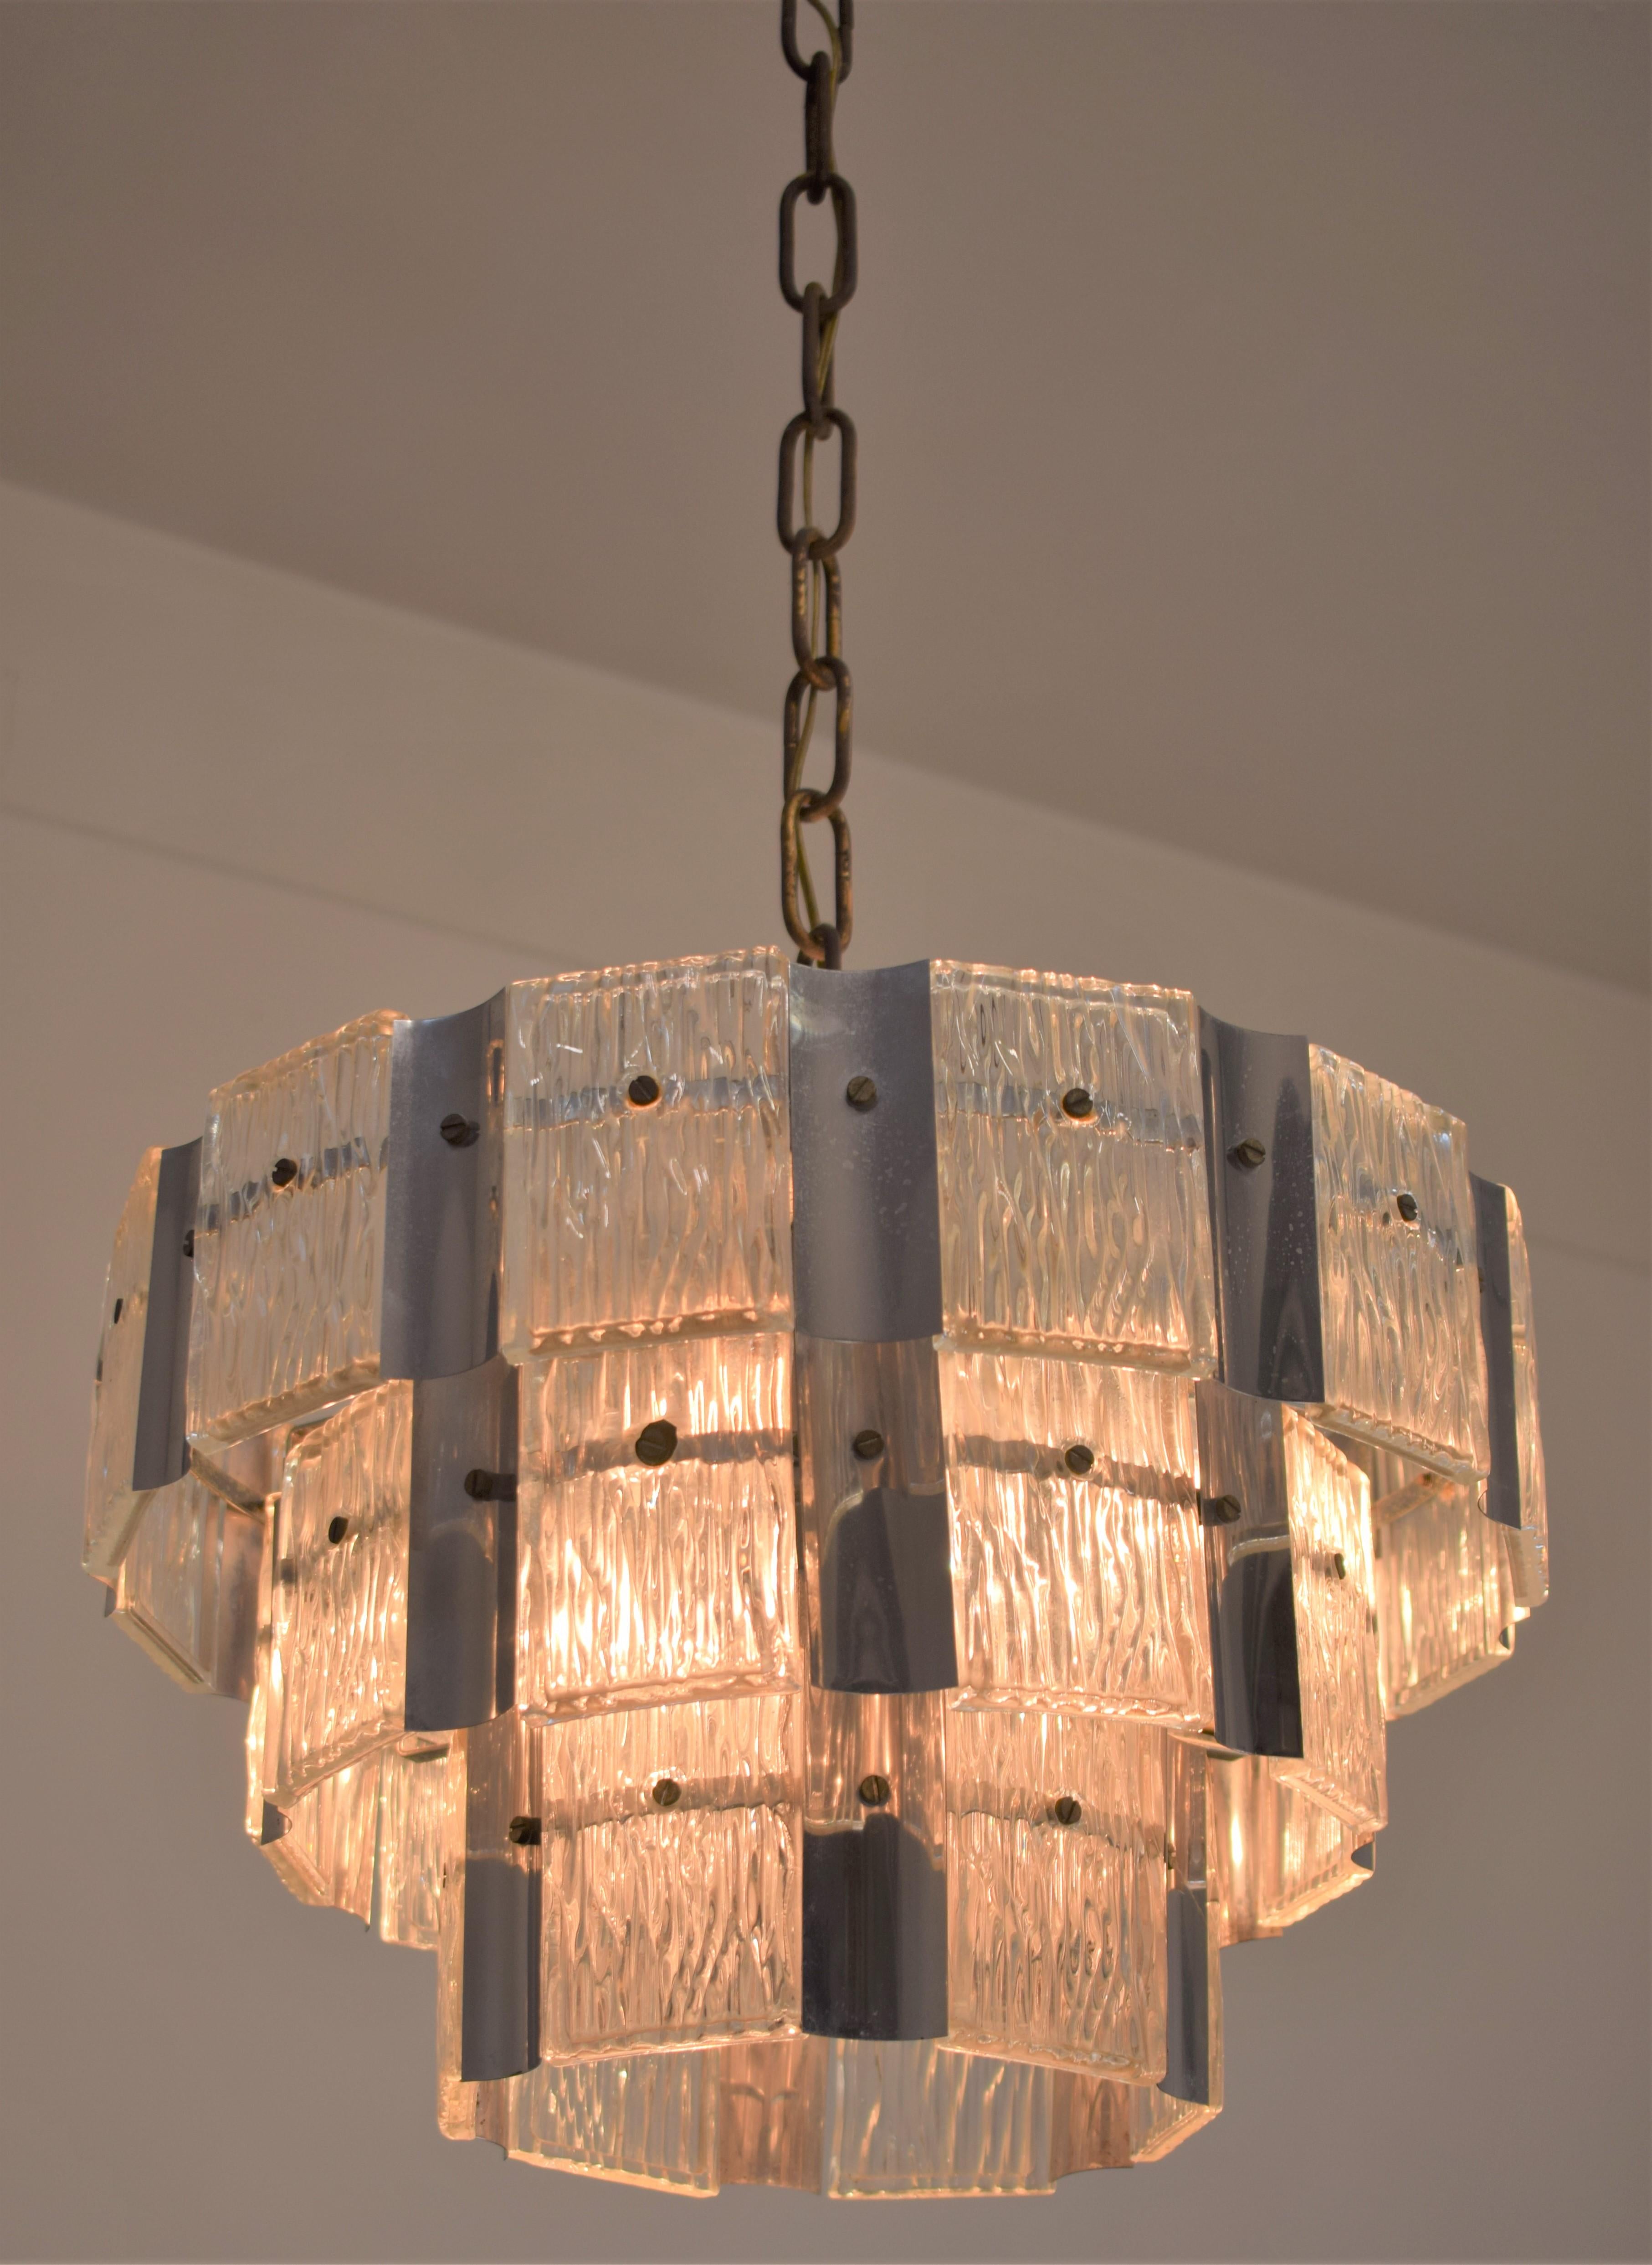 Italian glass and steel chandelier, 1970s.

Dimensions: H= 90 cm; D= 40 cm.